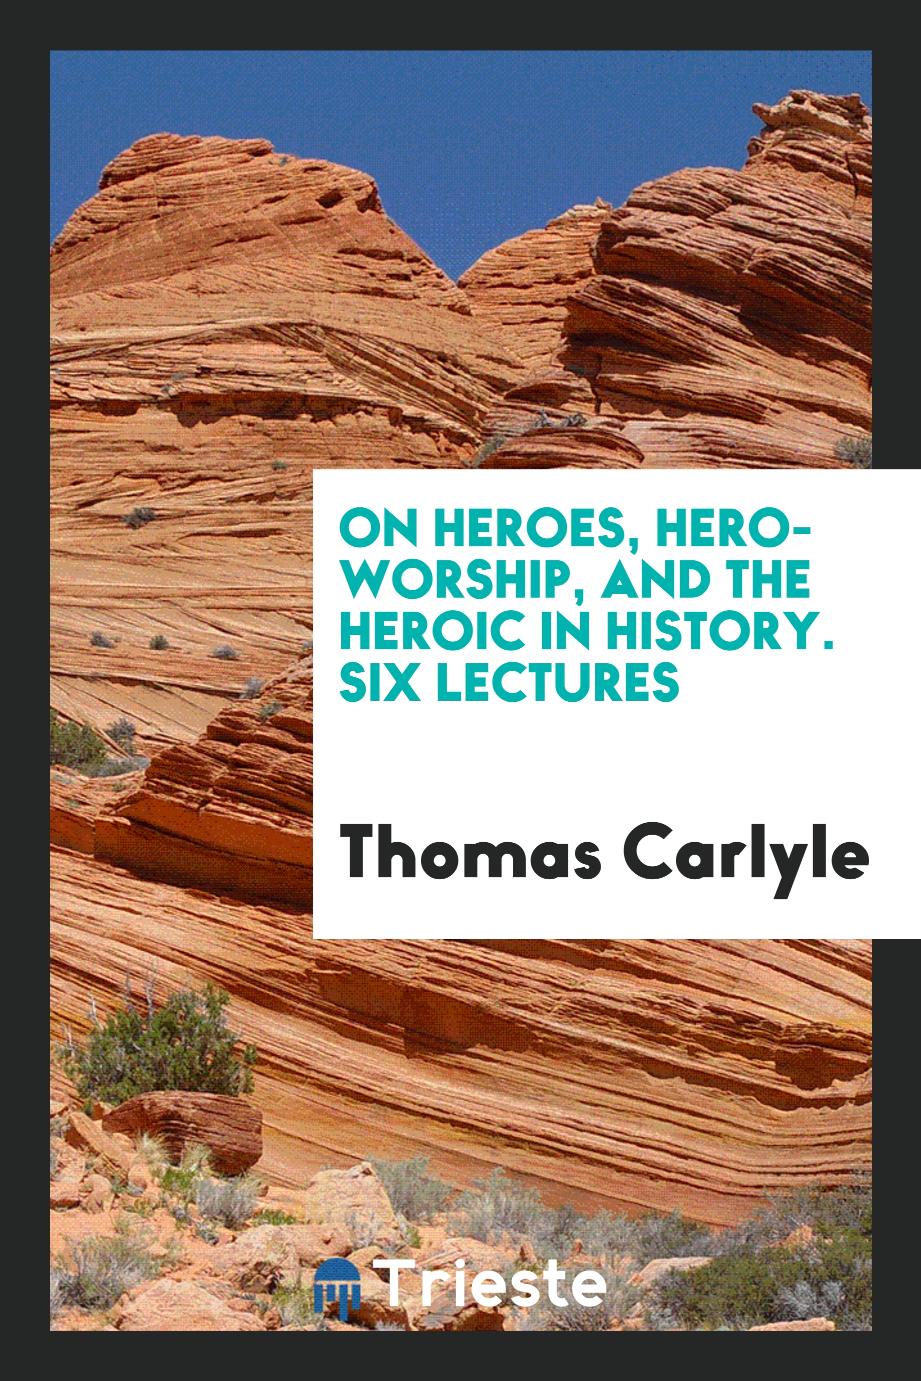 On Heroes, Hero-Worship, and the Heroic in History. Six Lectures